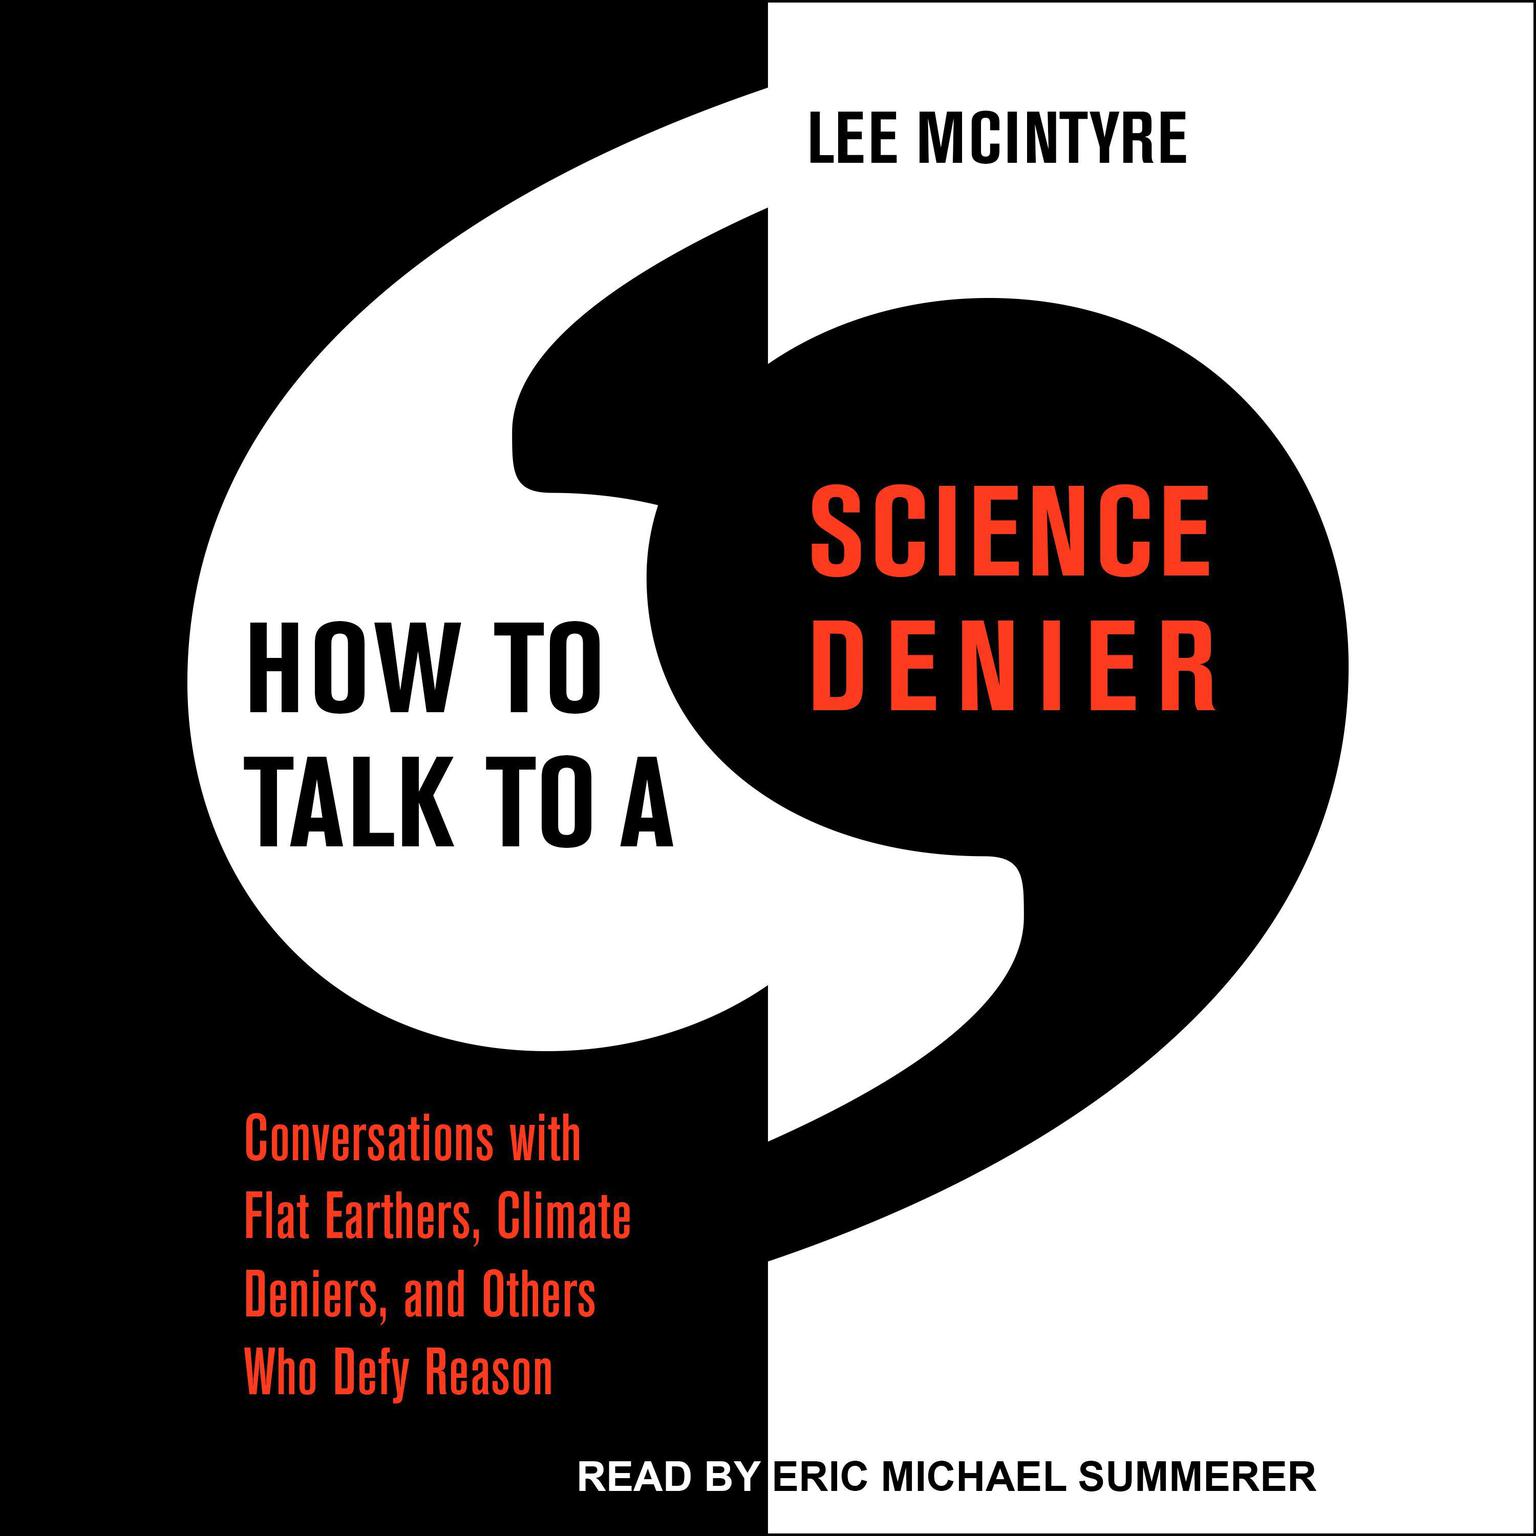 How to Talk to a Science Denier: Conversations with Flat Earthers, Climate Deniers, and Others Who Defy Reason Audiobook, by Lee McIntyre